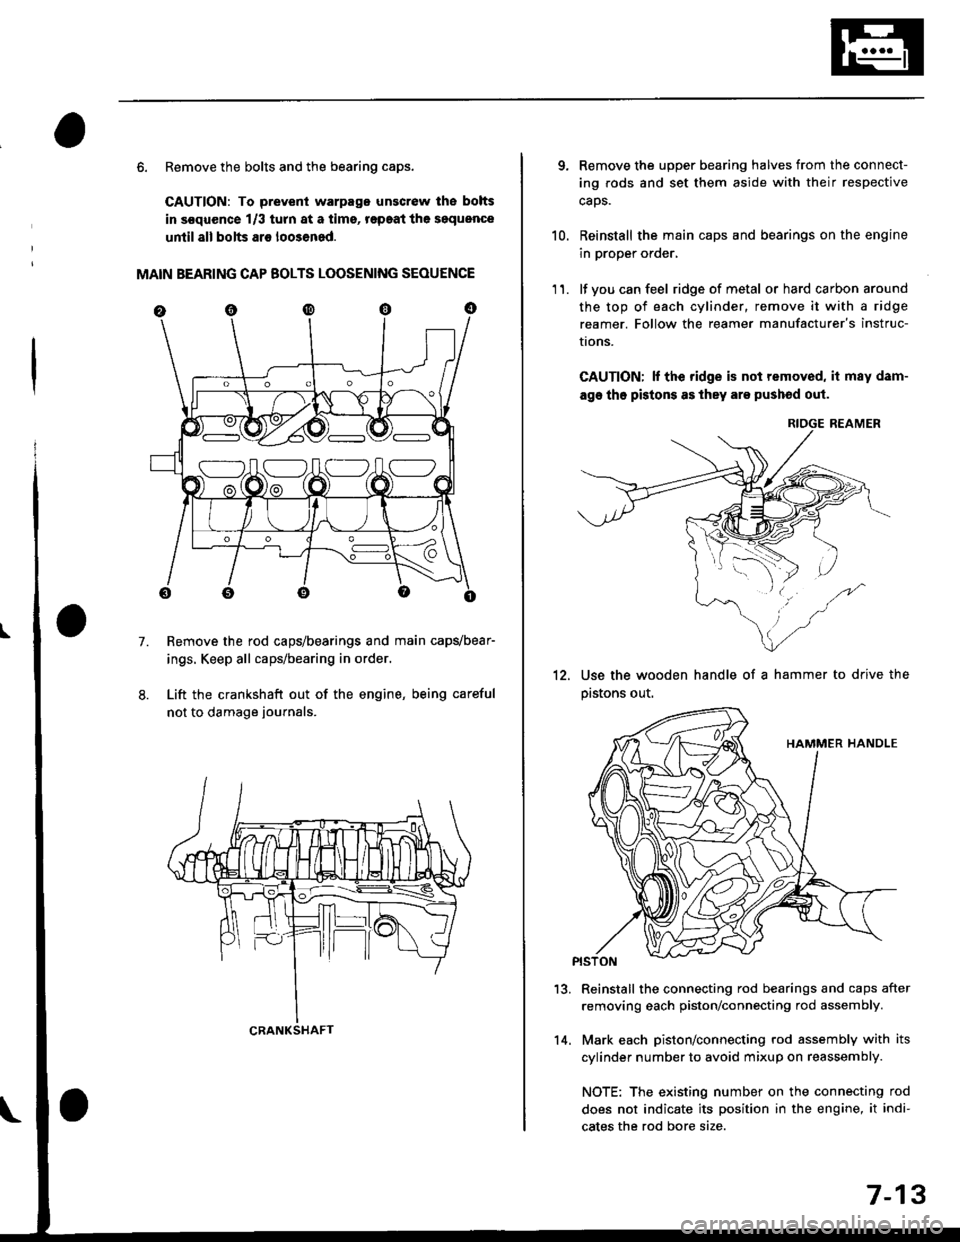 HONDA CIVIC 1996 6.G Workshop Manual 6. Remove the bolts and the bearing caps.
CAUTION: To prevenl warpago unscrow lhe bolts
in s€quence 1/3 turn at a tims, r€paat the soquence
until all bolts ar€ loo3ened.
MAIN BEARING CAP BOLTS L